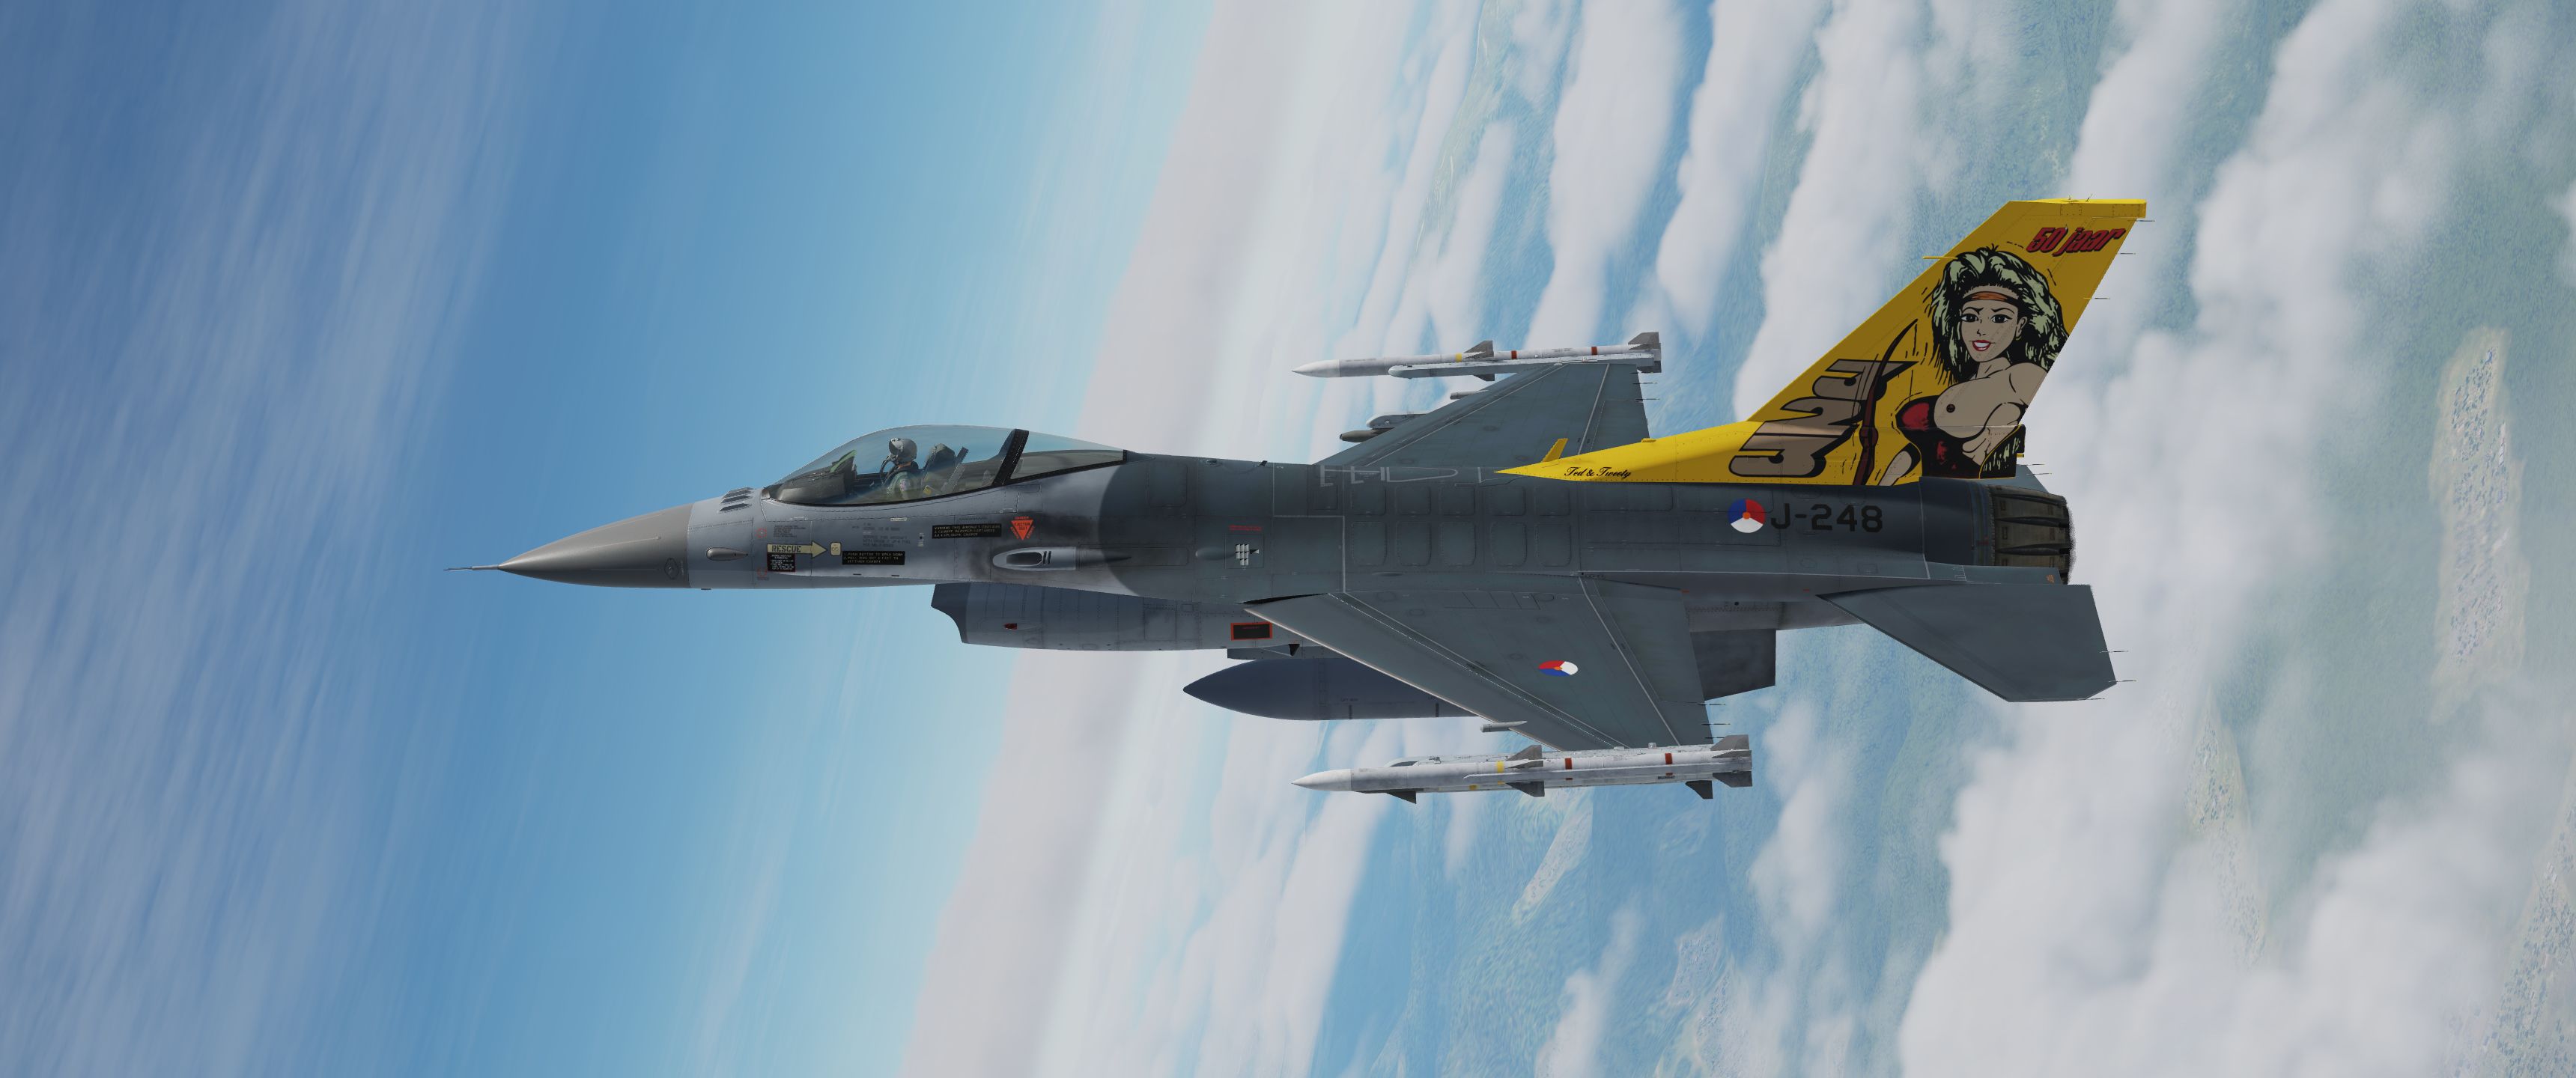 Royal Netherlands Air Force F-16AM "Dirty Diana"